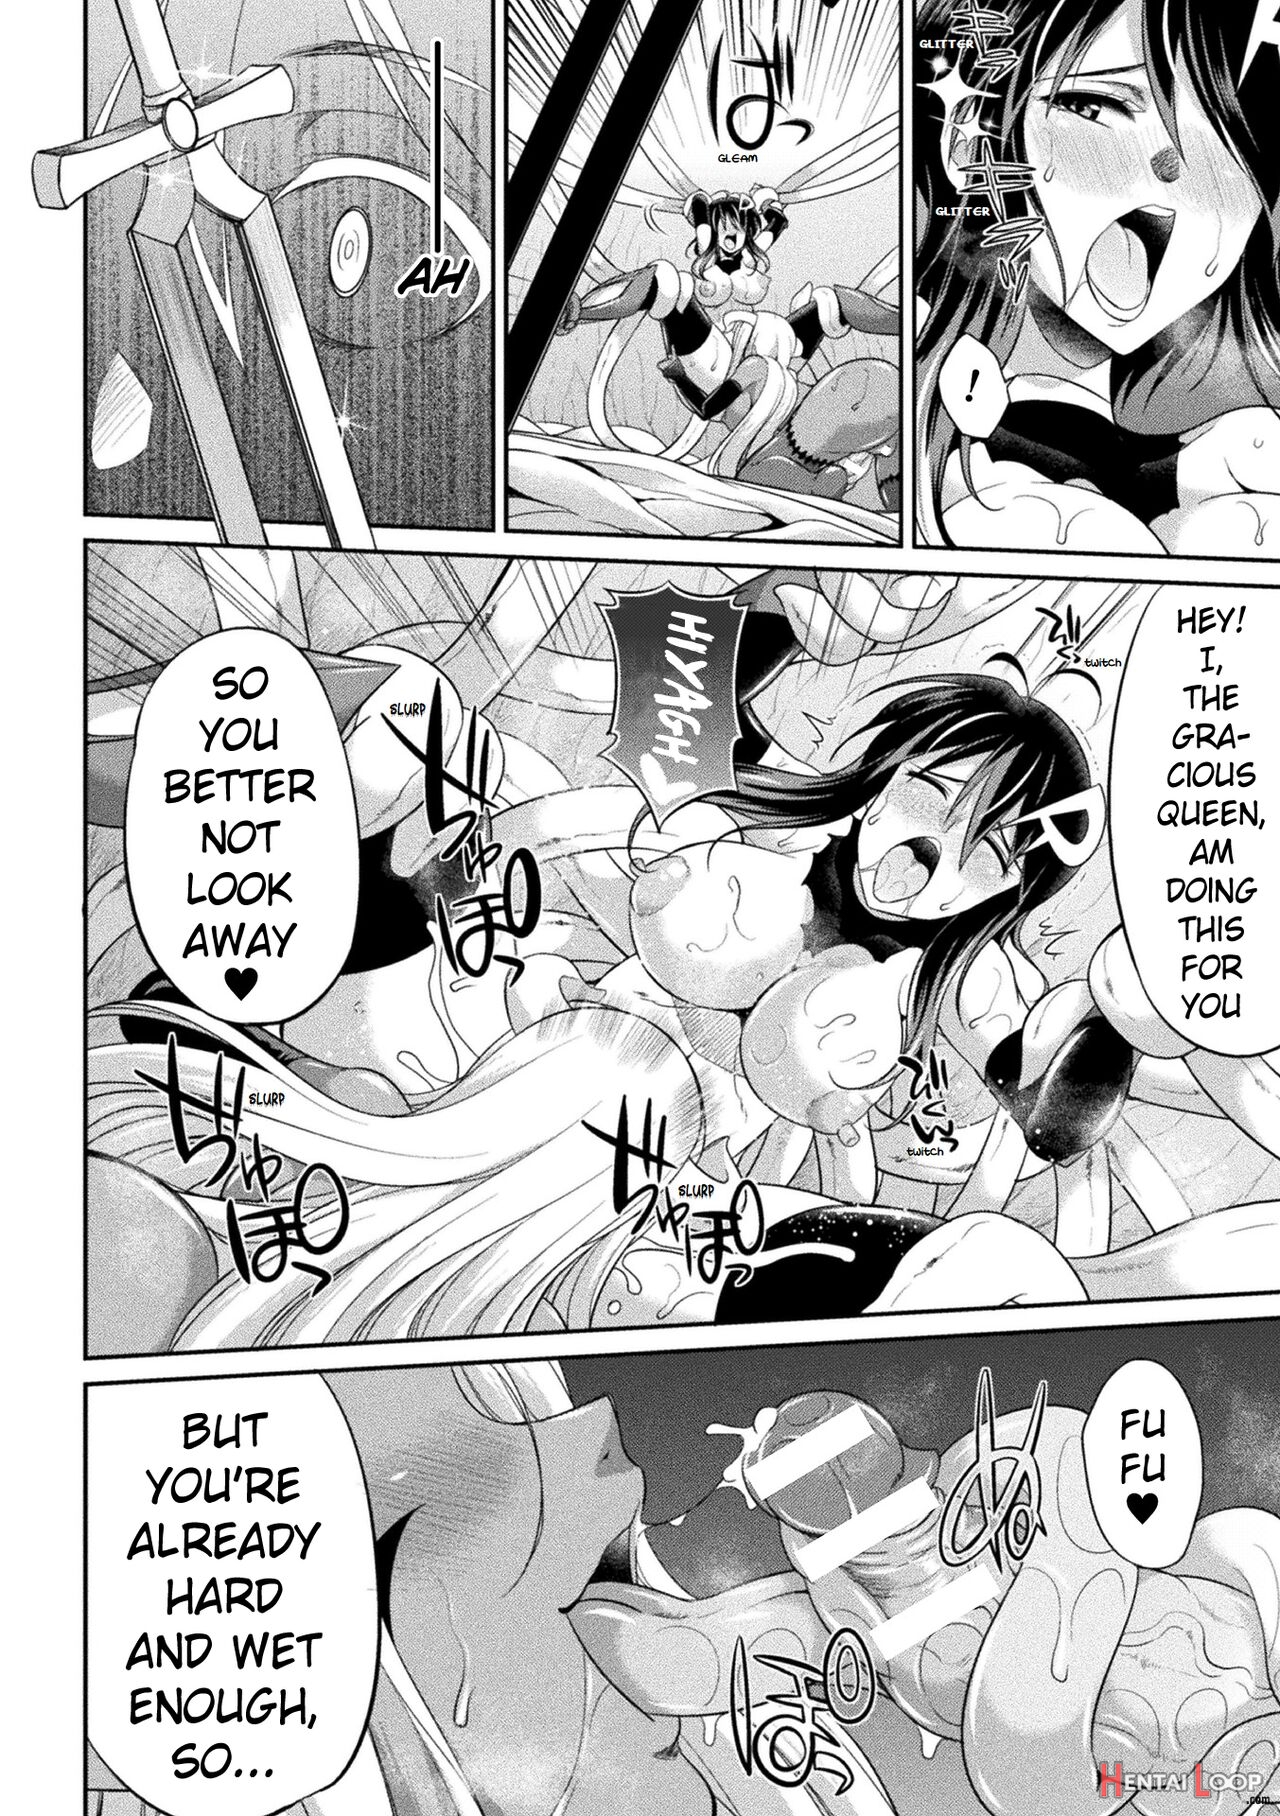 Special Duty Squadron Colorful Force Heroines Of Justice Vs The Tentacle Queen! The Great Battle Of Futa Training!? page 42